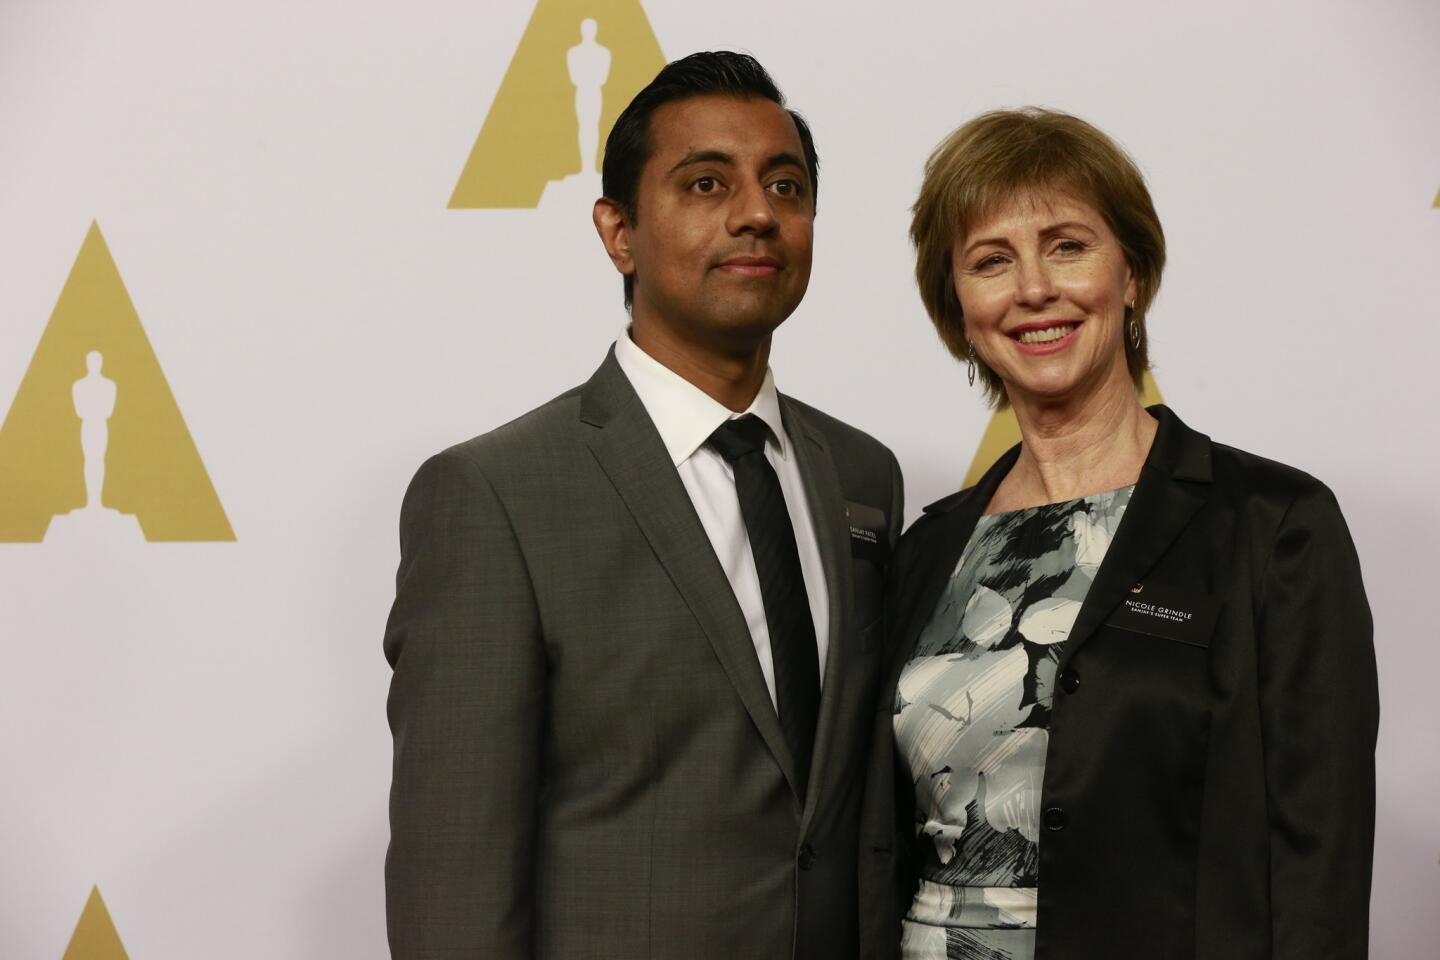 Sanjay Patel and Nicole Grindle | Academy Awards luncheon